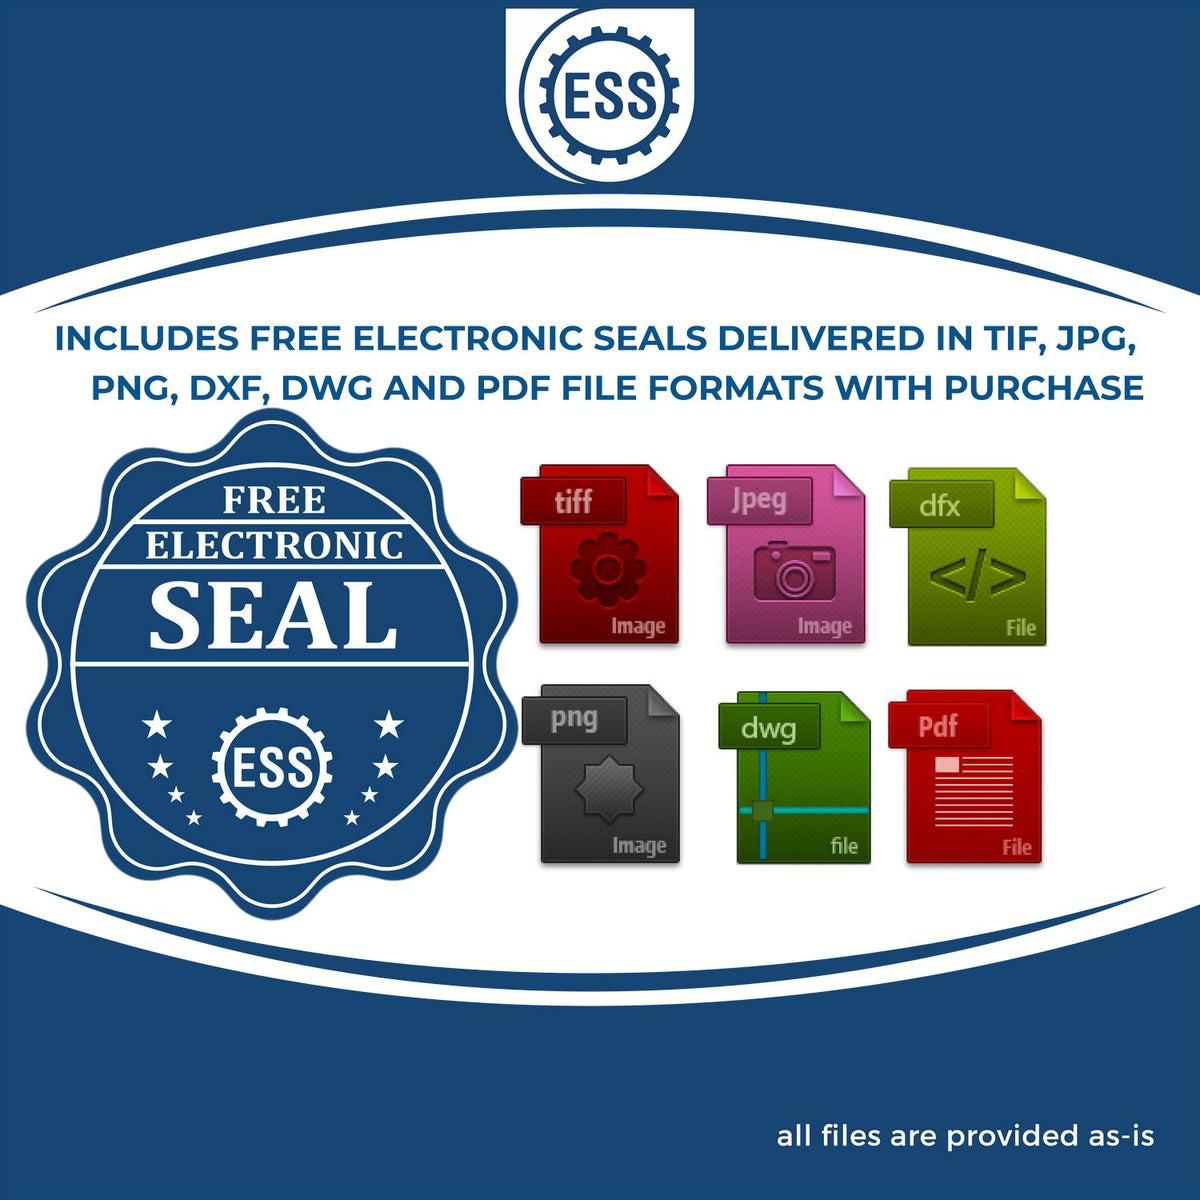 An infographic for the free electronic seal for the Hybrid Connecticut Engineer Seal illustrating the different file type icons such as DXF, DWG, TIF, JPG and PNG.